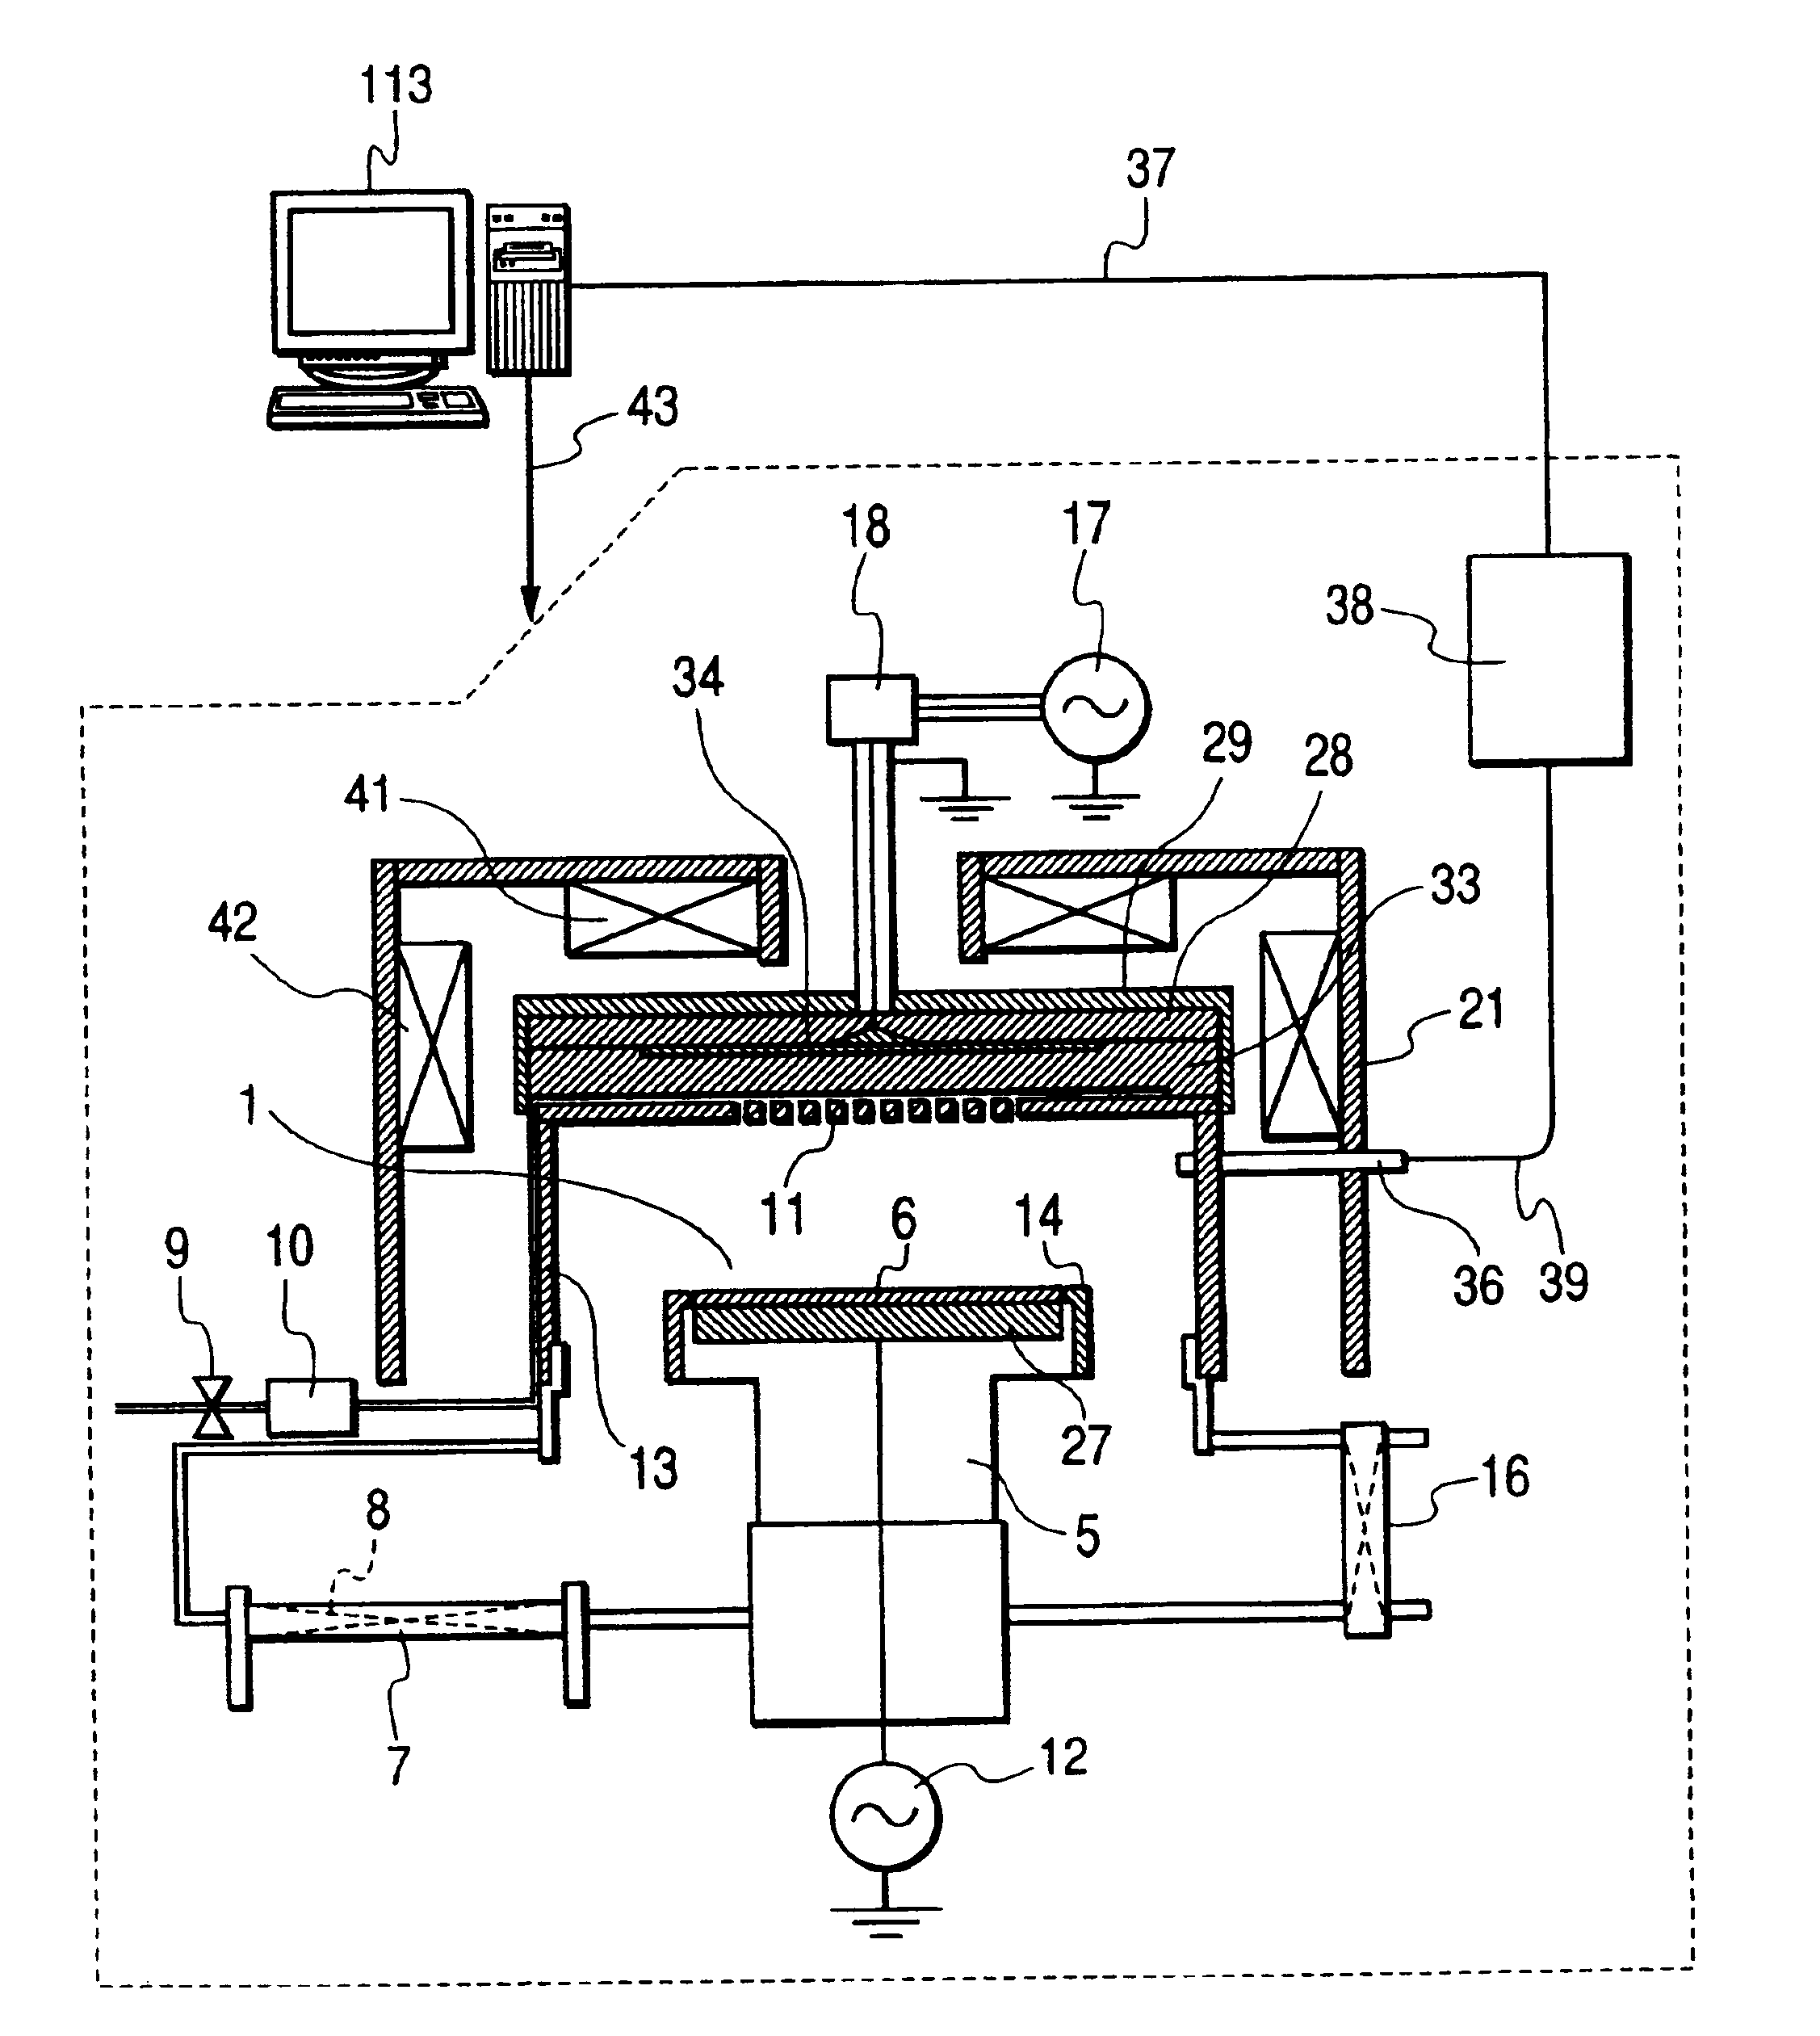 Method of manufacturing a semiconductor device and manufacturing system